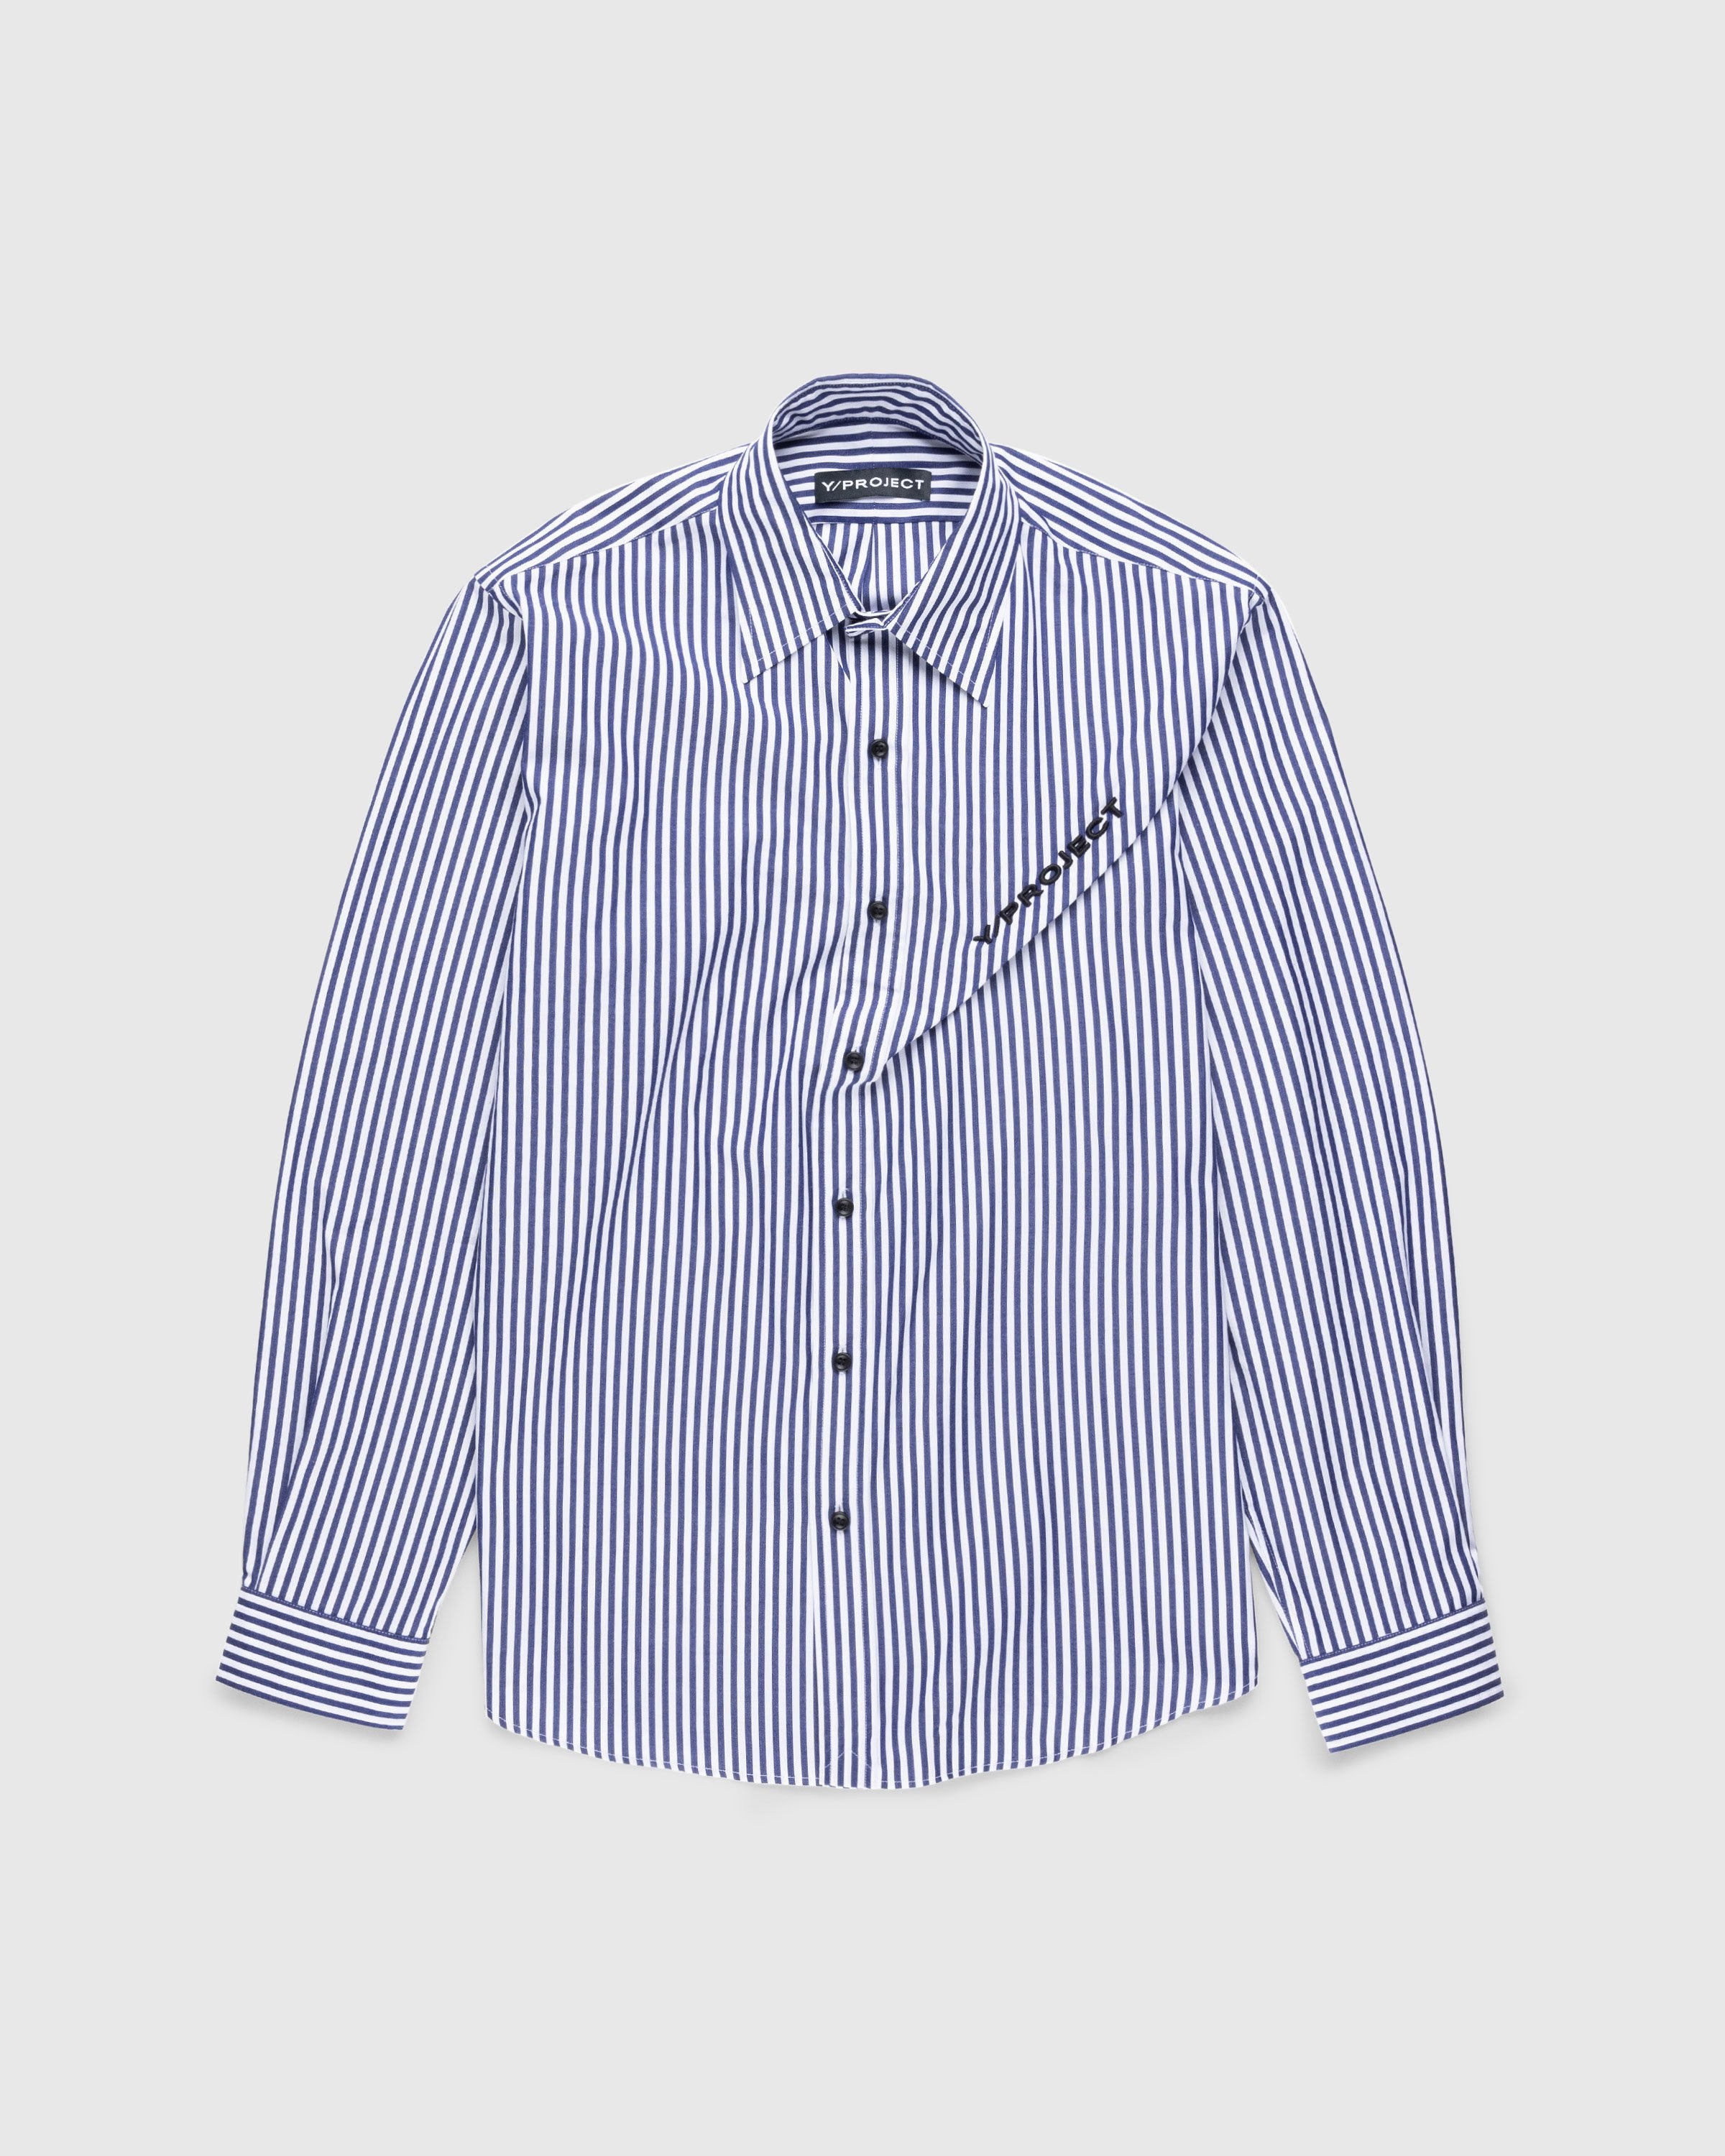 Y/Project – Pinched Logo Stripe Shirt Navy/White - Shirts - Blue - Image 1